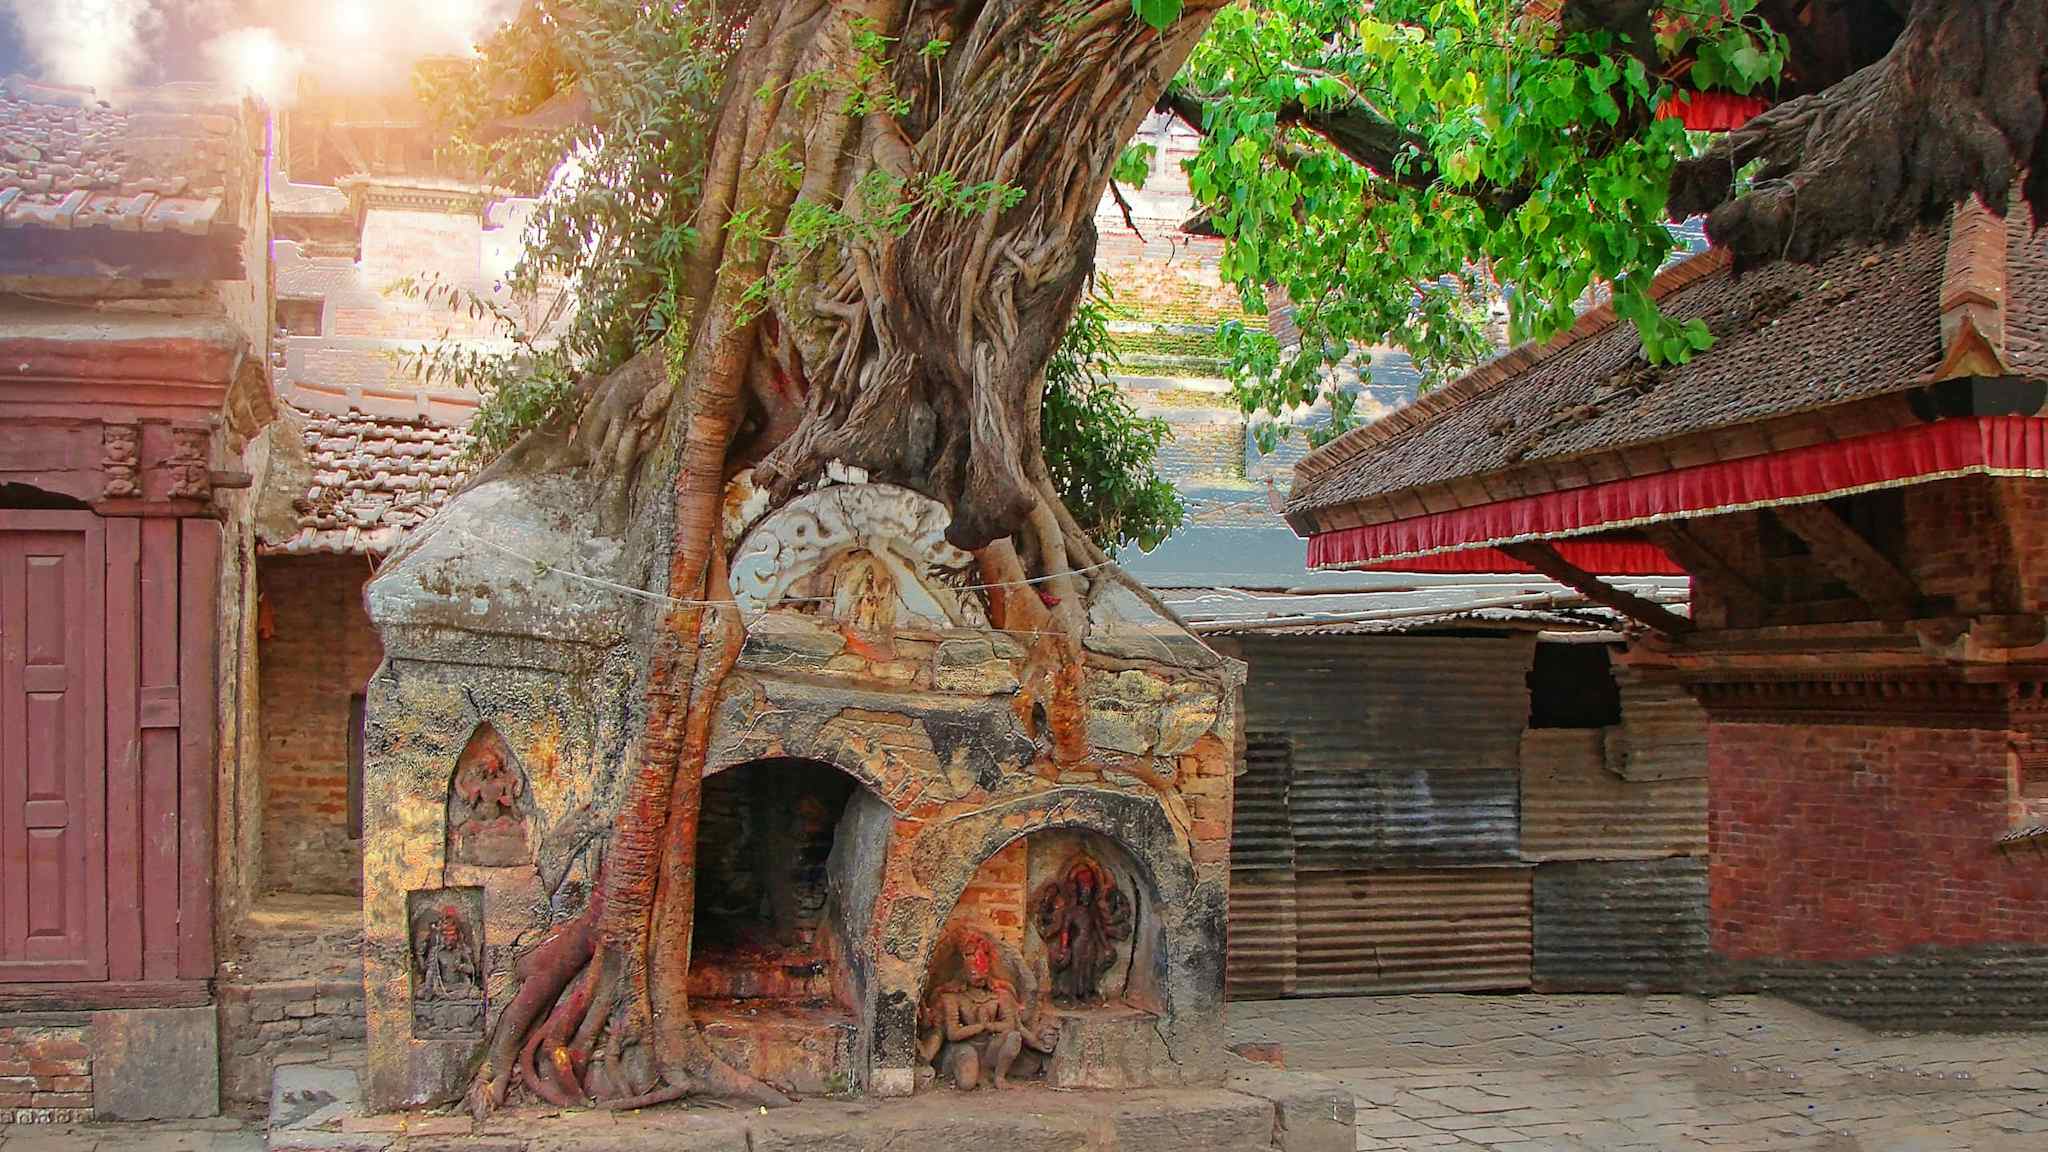 Tree roots taking over a temple in Thamel, Kathmandu, Nepal. 